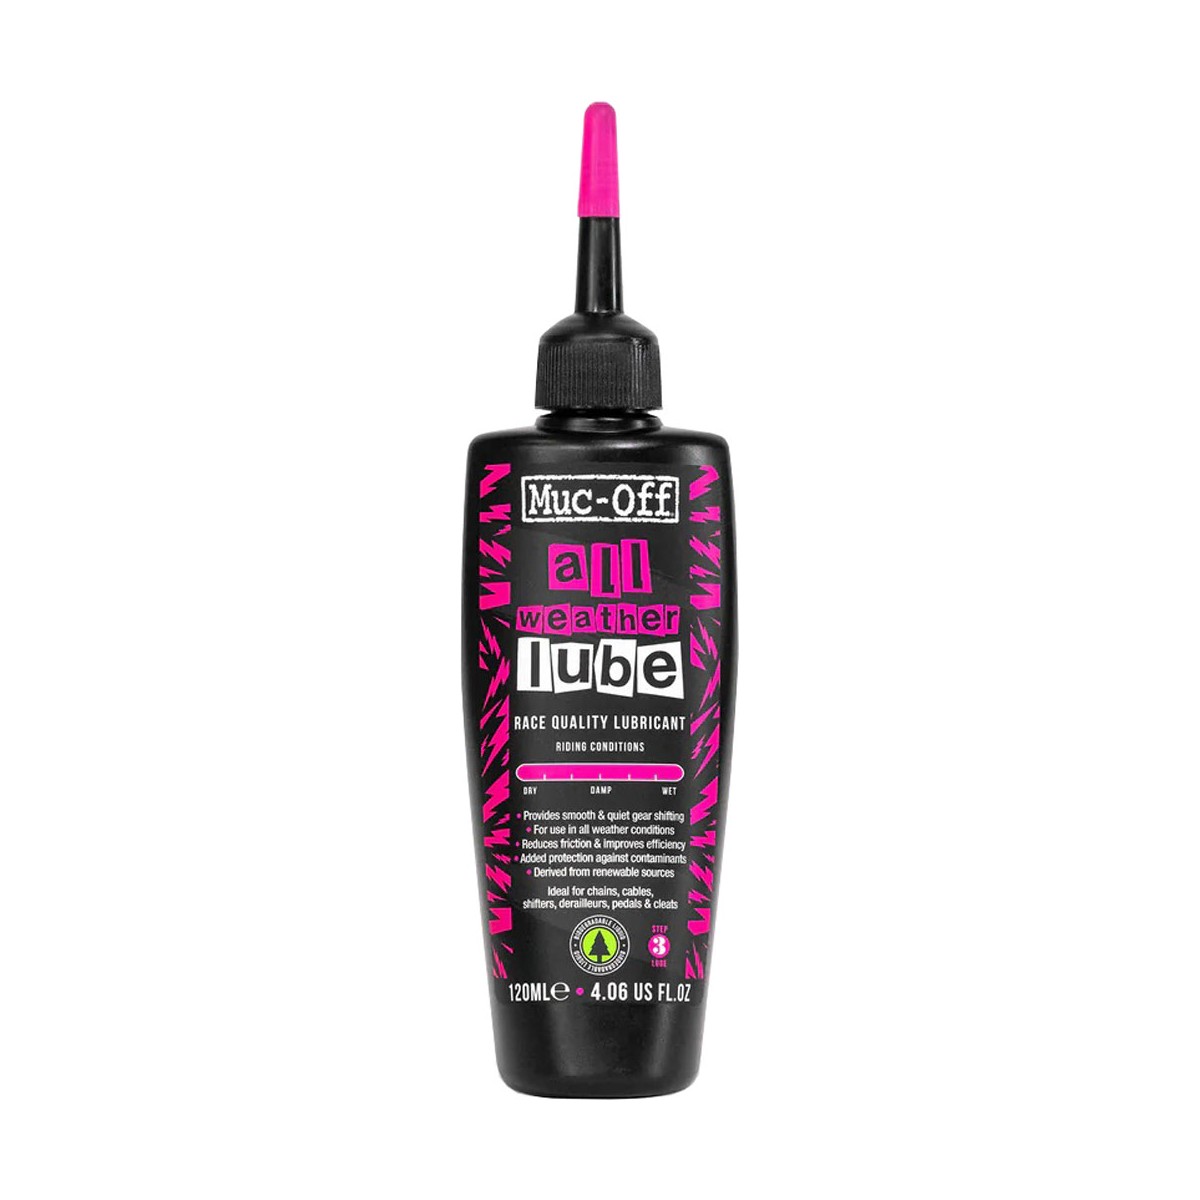 MUC-OFF ALL WEATHER lube 120ml